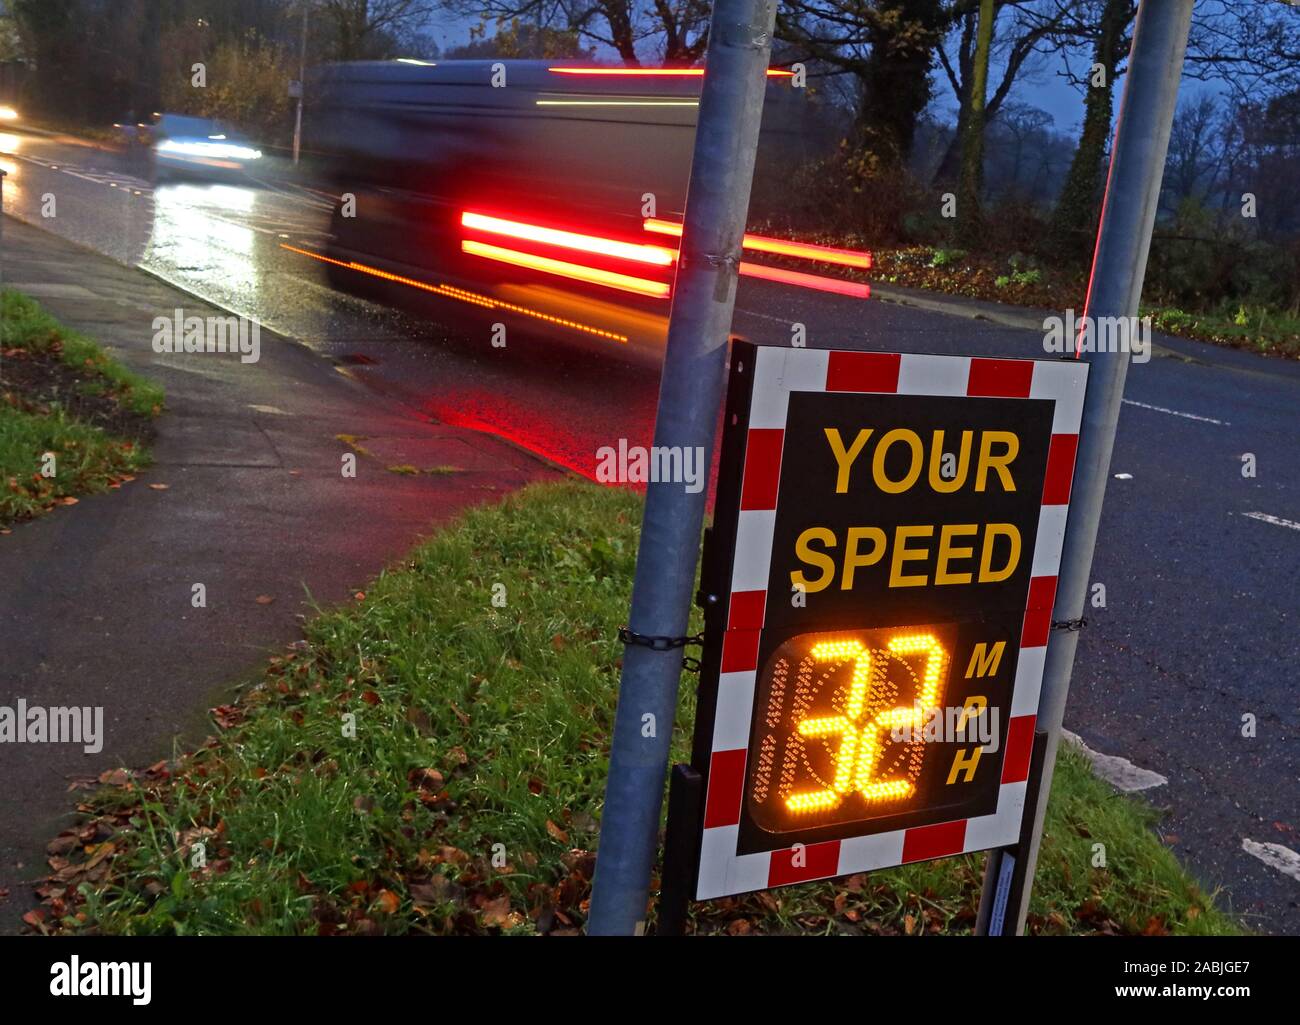 Community speed radar checks,showing Your Speed 32 MPH, A50, Knutsford Road, Grappenhall / Massey Brook, Warrington, Cheshire, England UK - 30mph zone Stock Photo